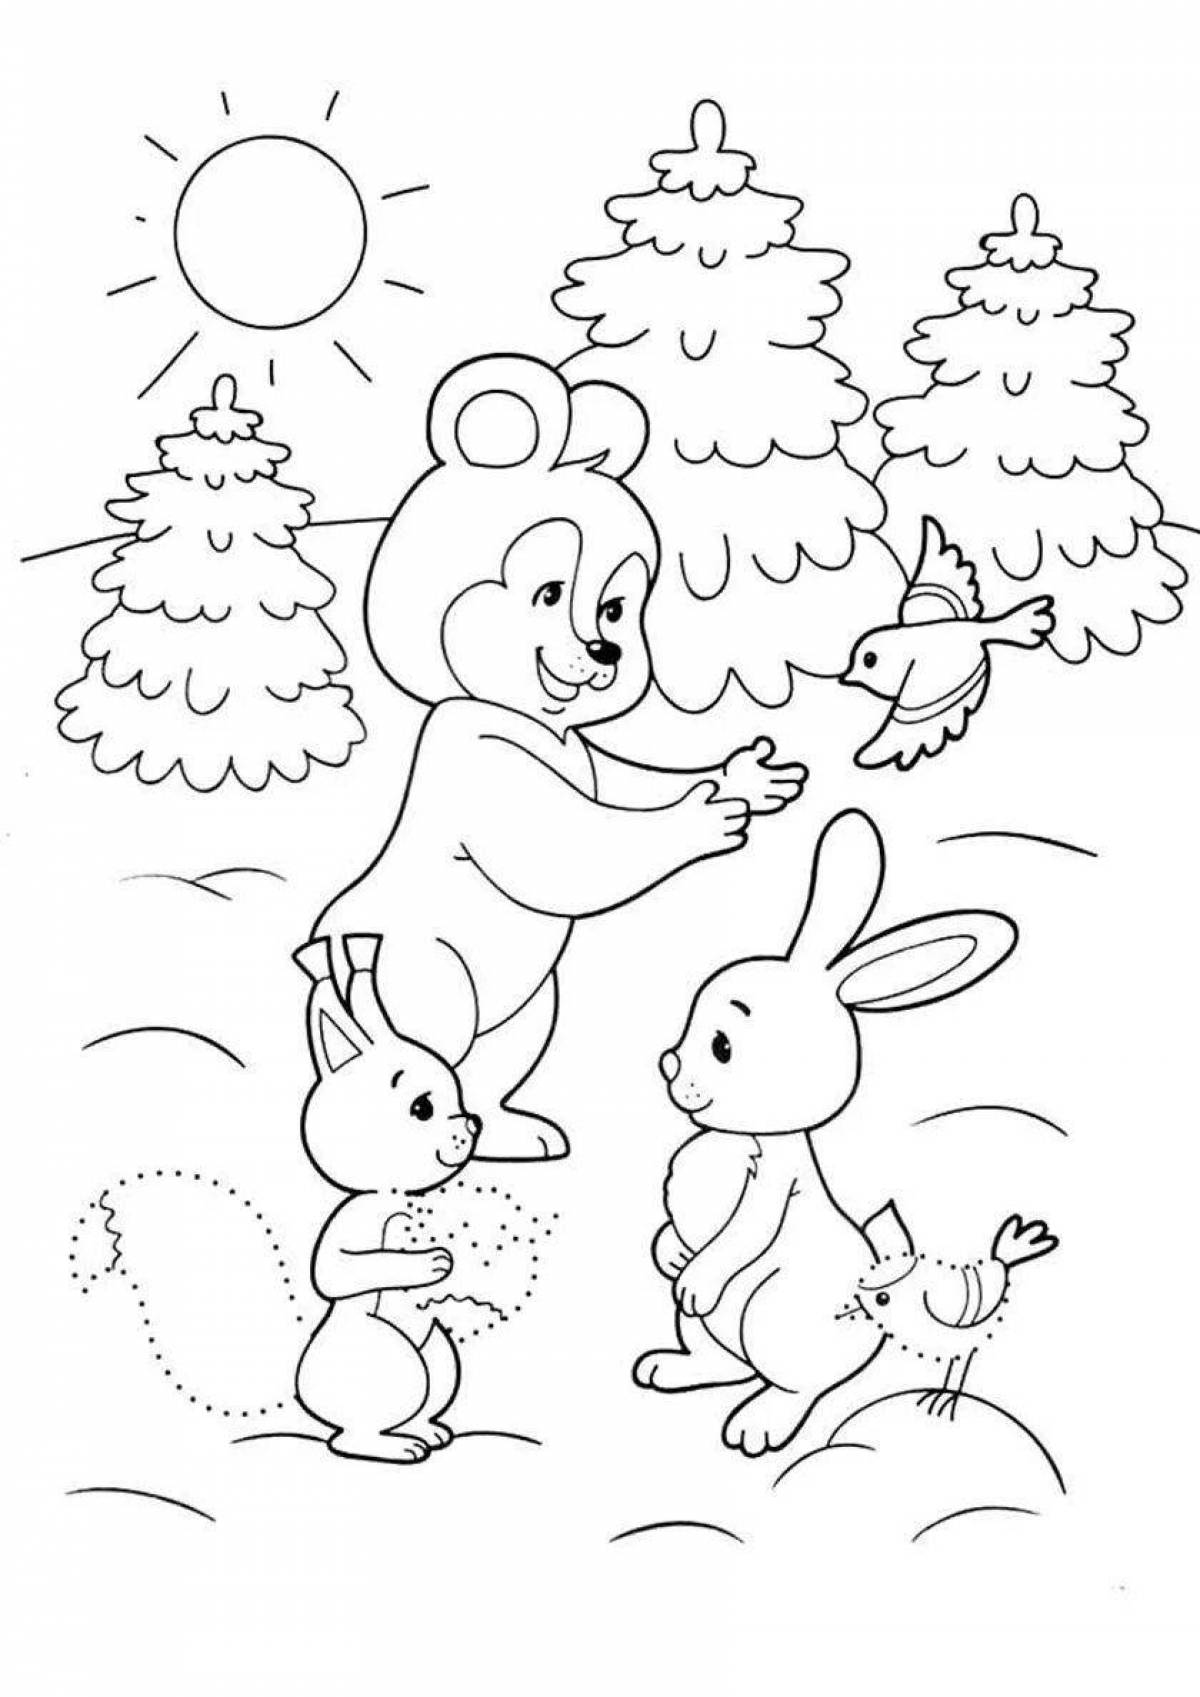 Vibrant hare and squirrel coloring page